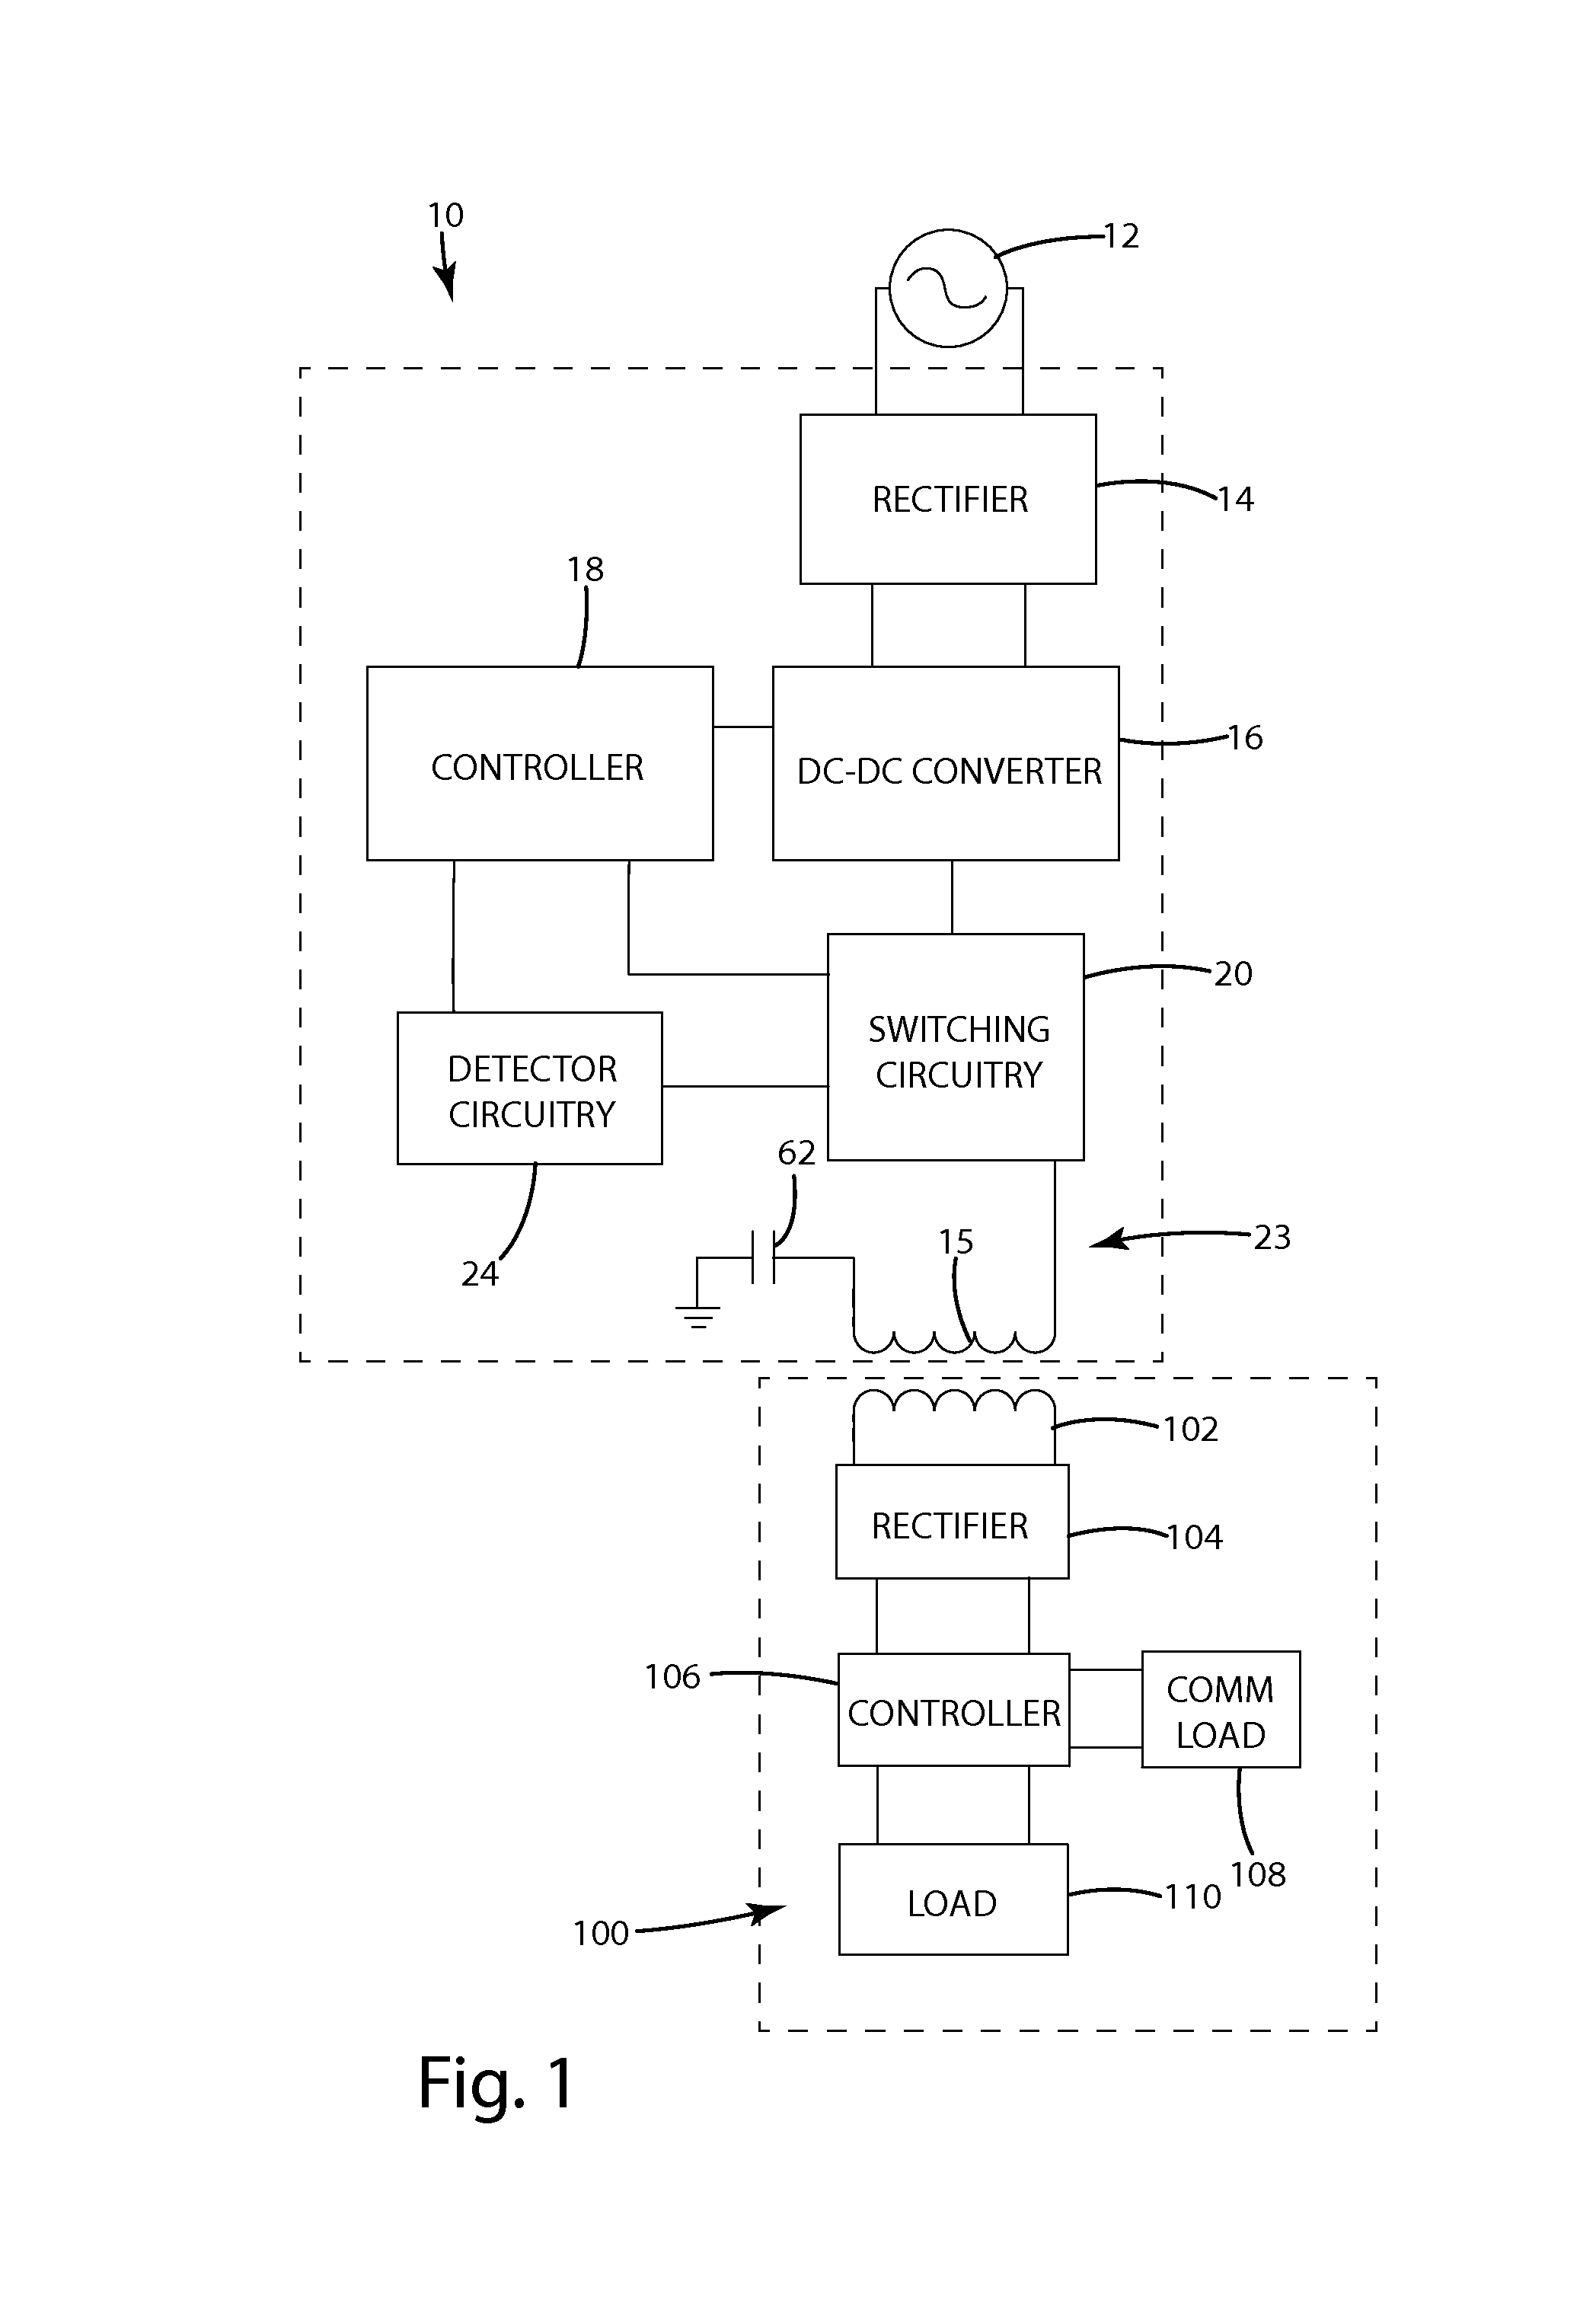 Systems and methods for detecting data communication over a wireless power link